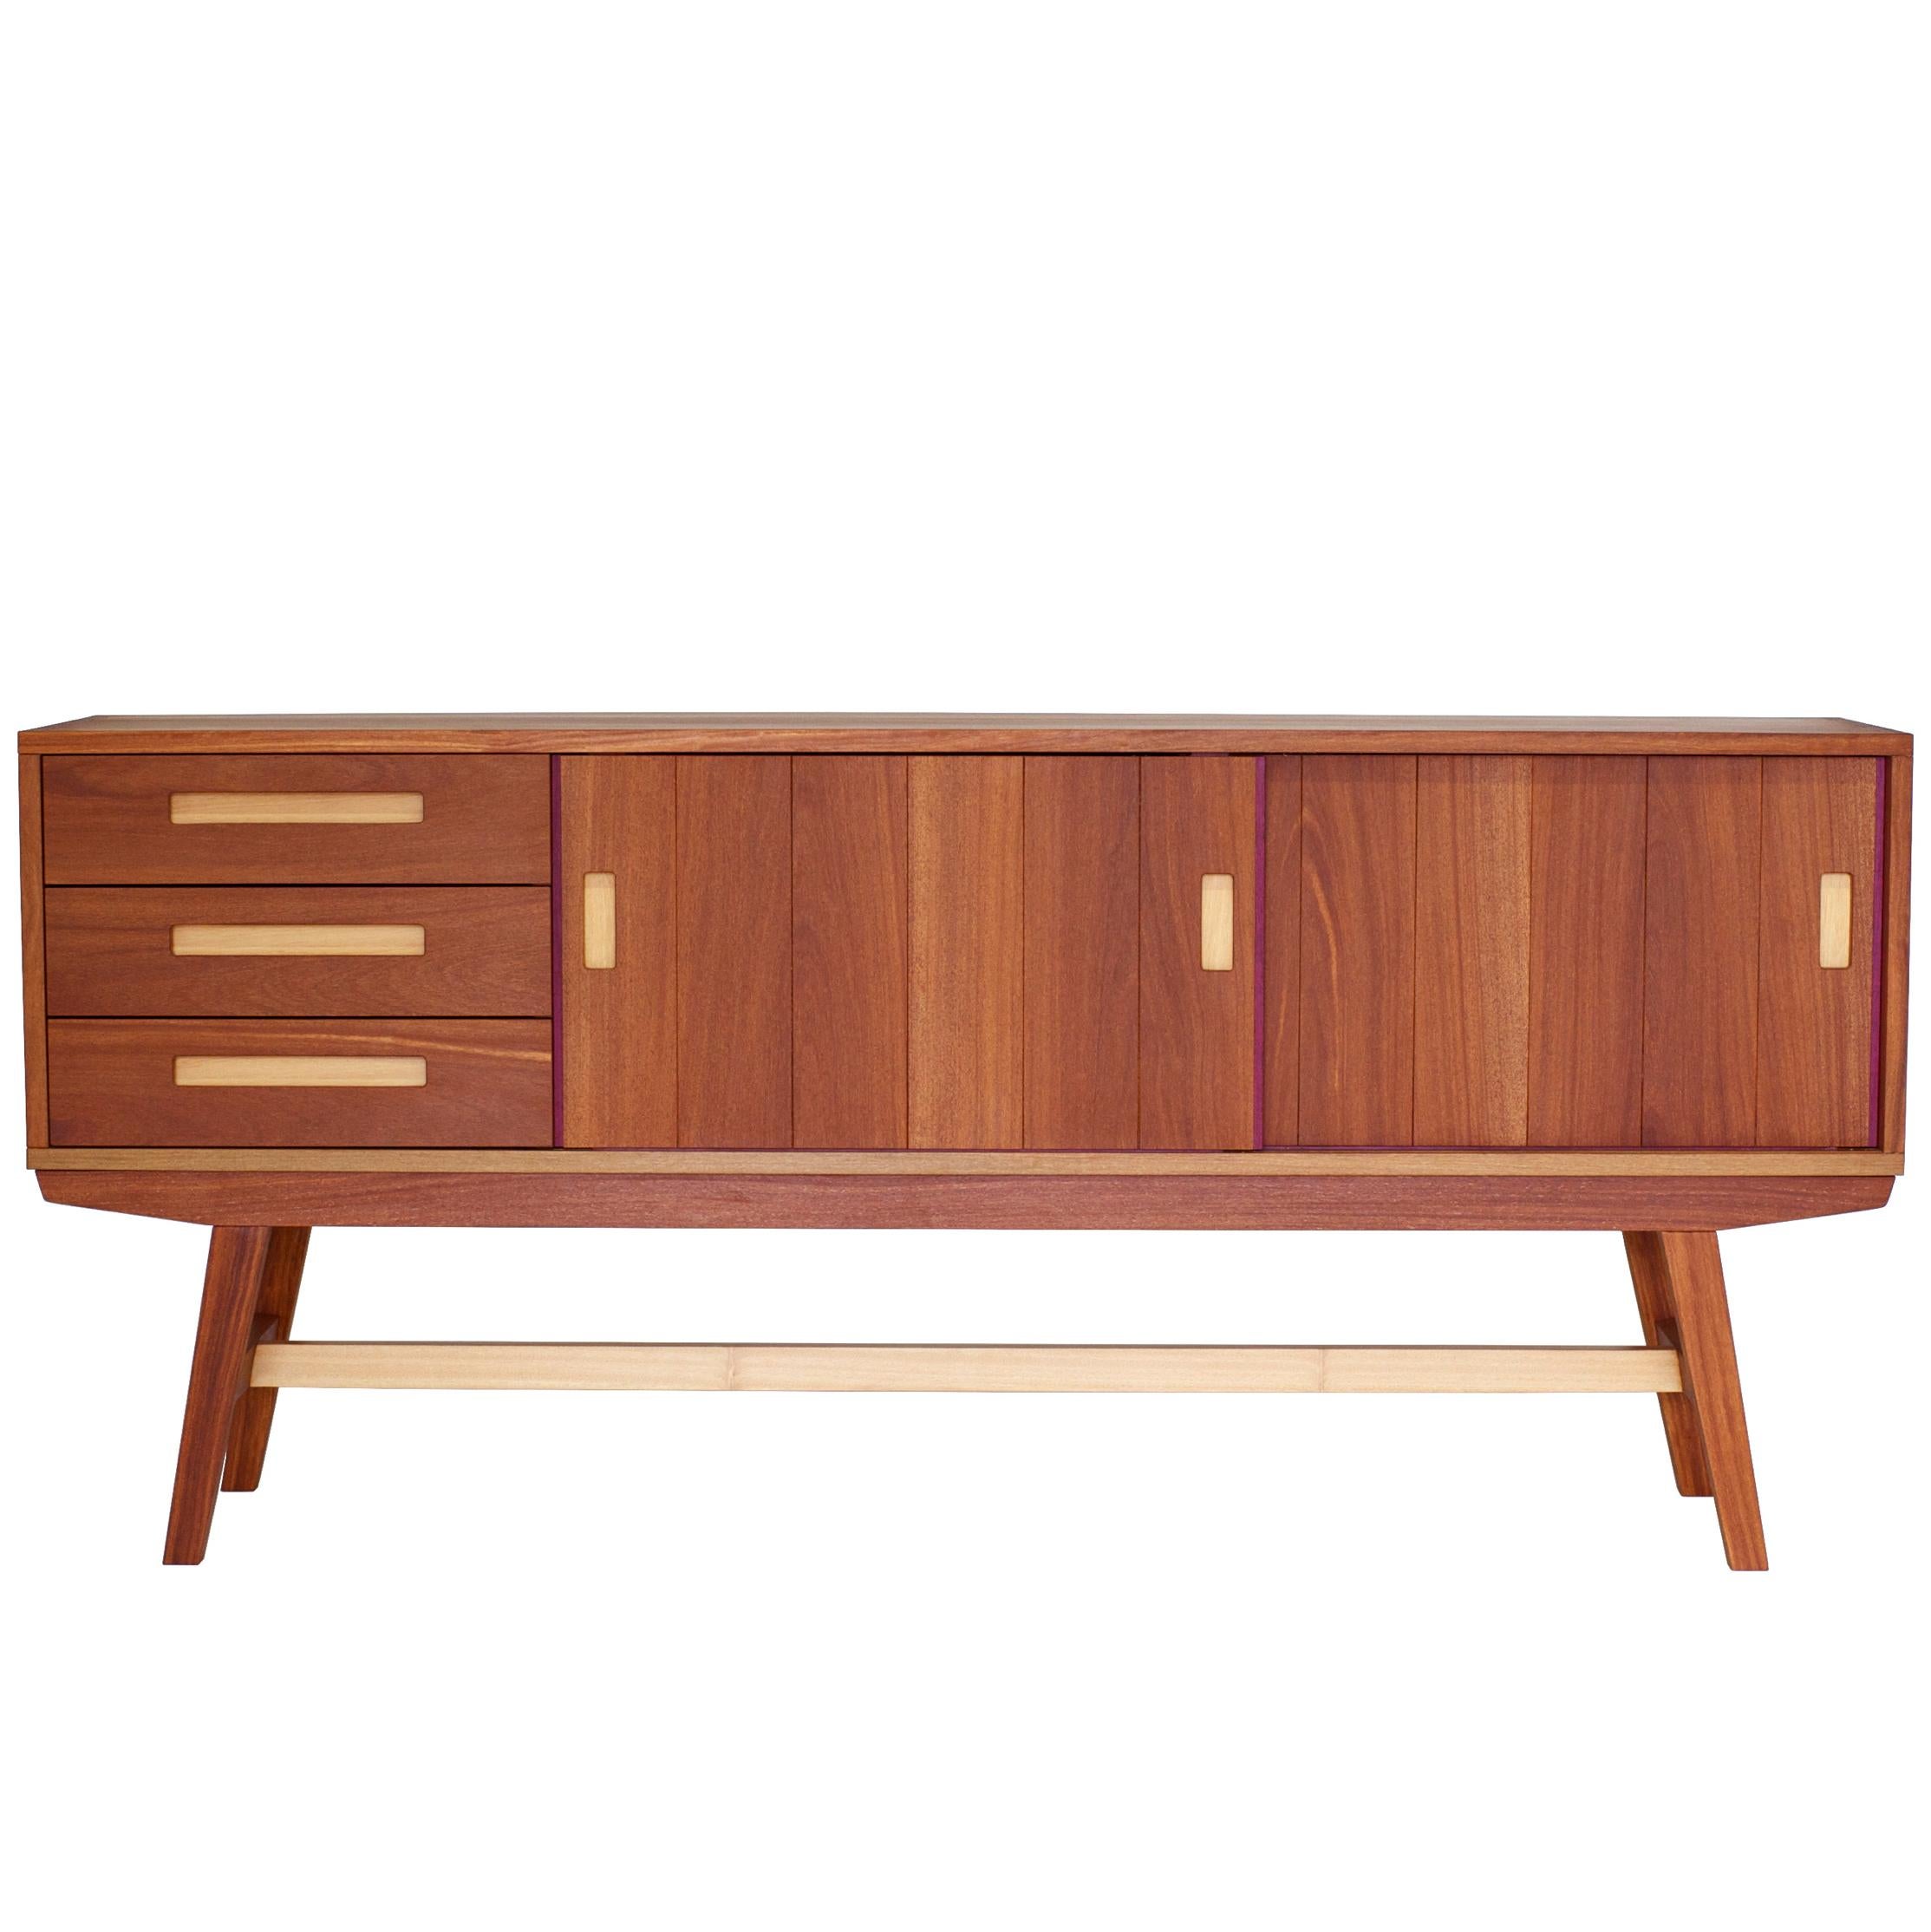 This contemporary credenza, buffet or low cabinet is a piece of furniture handcrafted in our own workshop. The credenza is carefully built with hardwood and traditional joints, such as dovetails, mortaises and tenons.

Elegant and functional, the